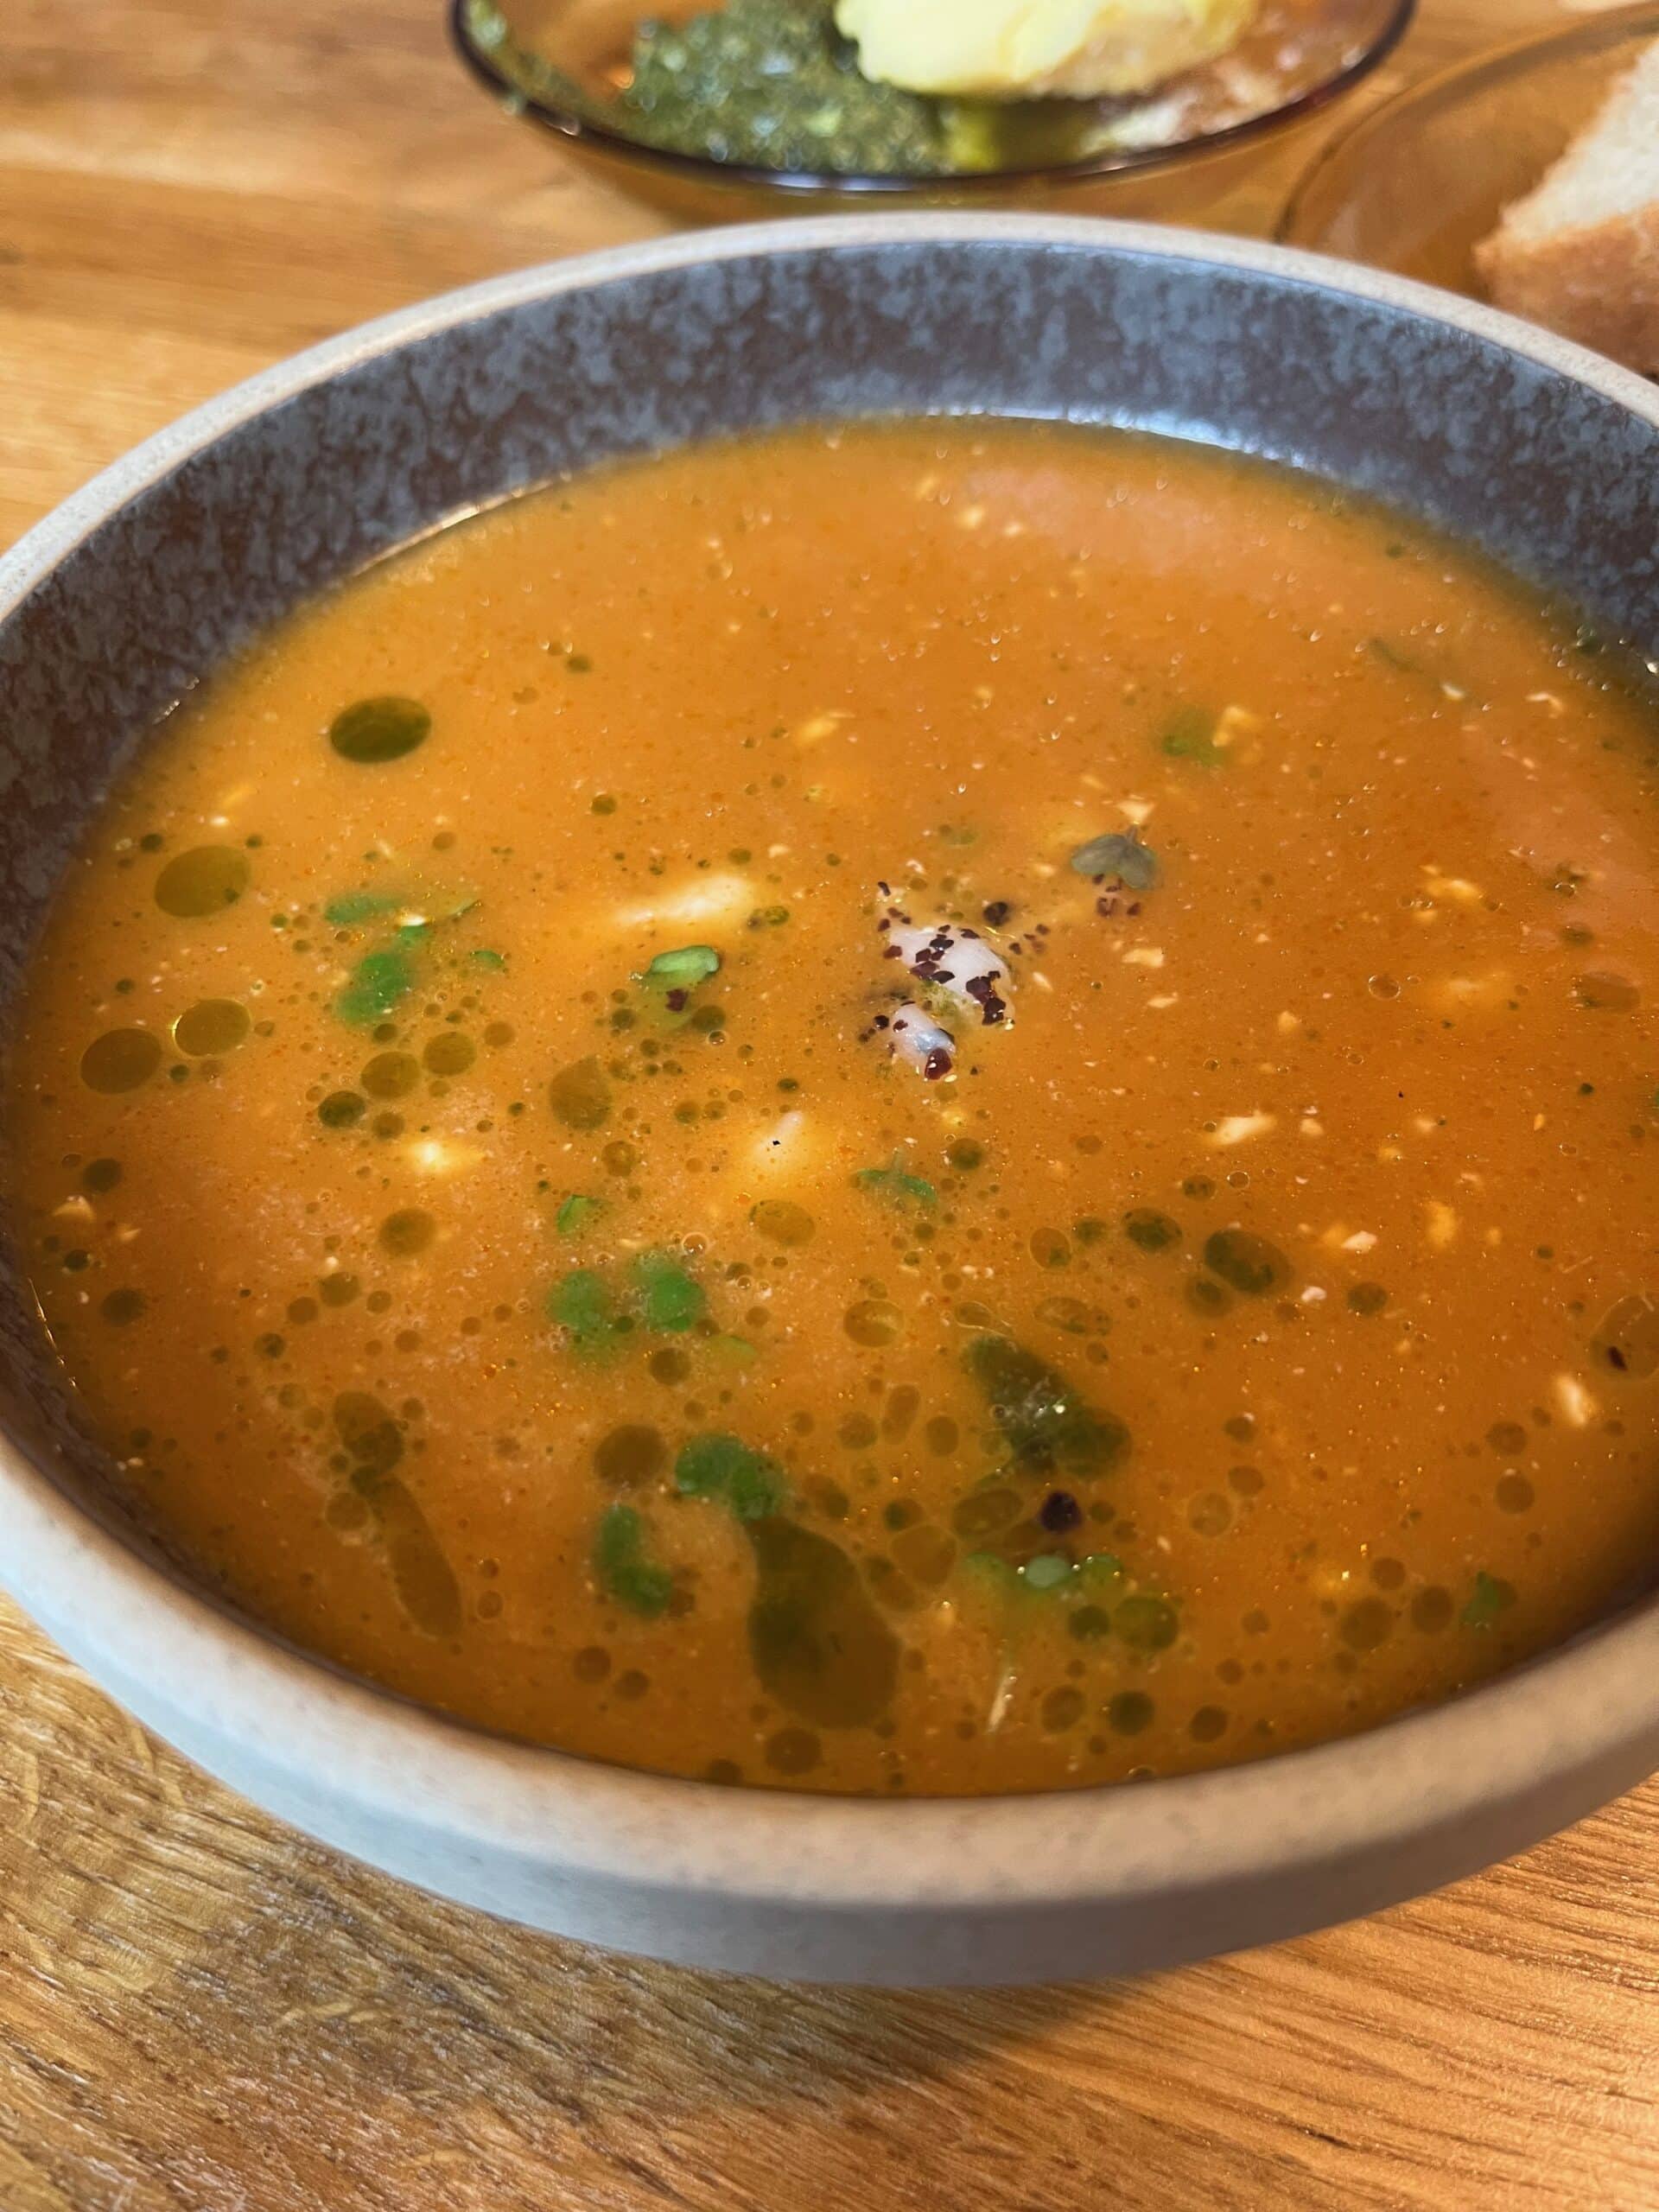 Fish soup, perfect for a stormy day. Photo: Kirsten Harrington